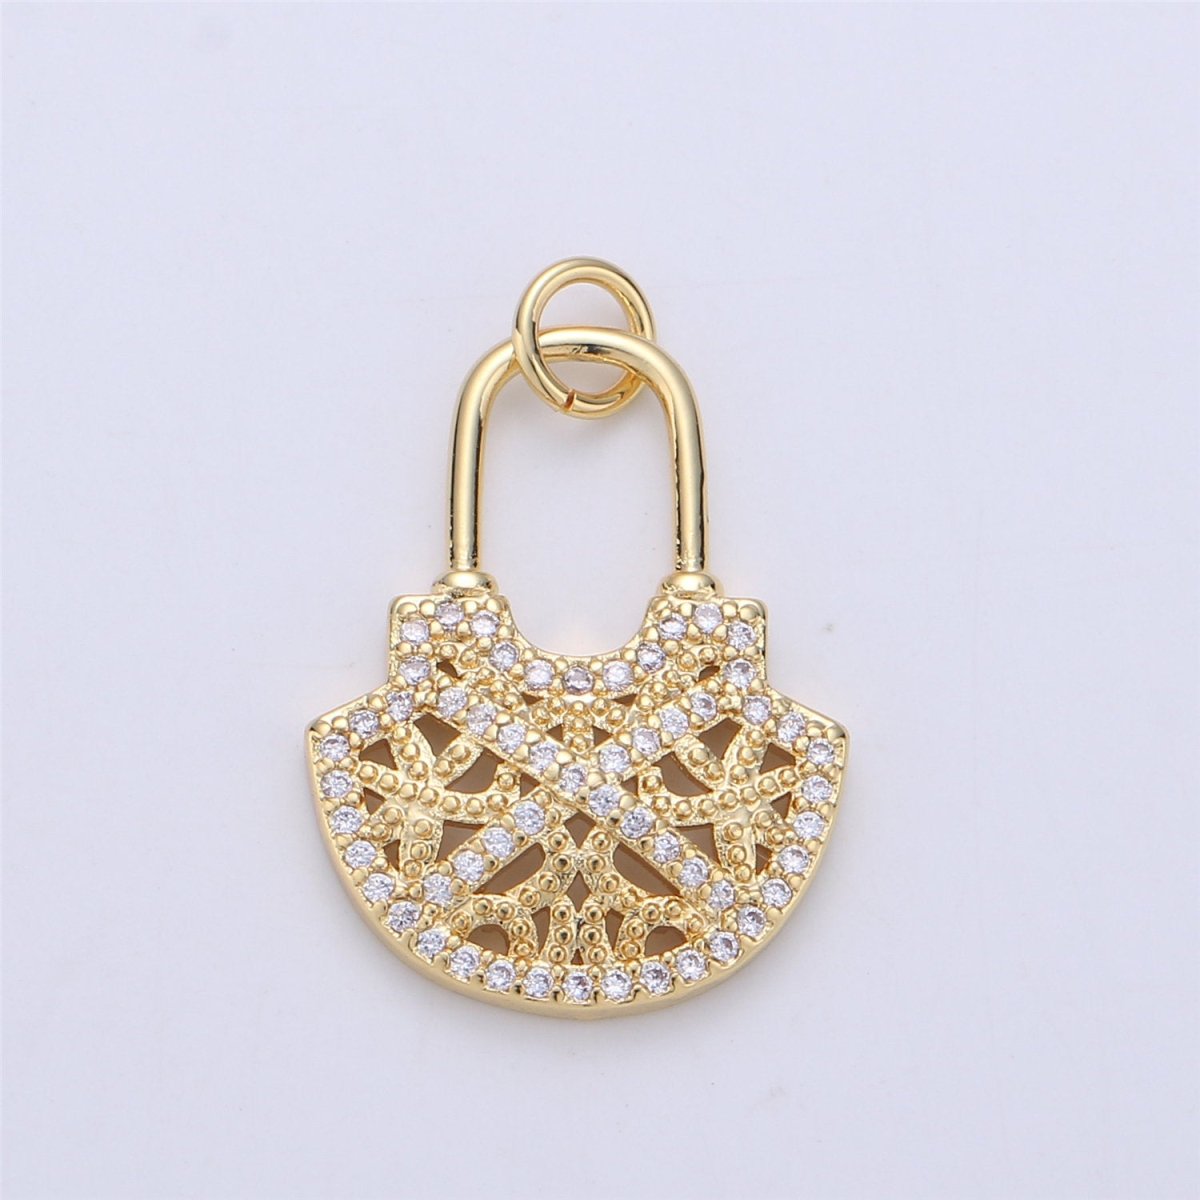 24k Gold Filled Micro Pave padlock charm for Jewelry making, Minimalist, Unique lock charm for Bracelet Necklace Earring Component - DLUXCA